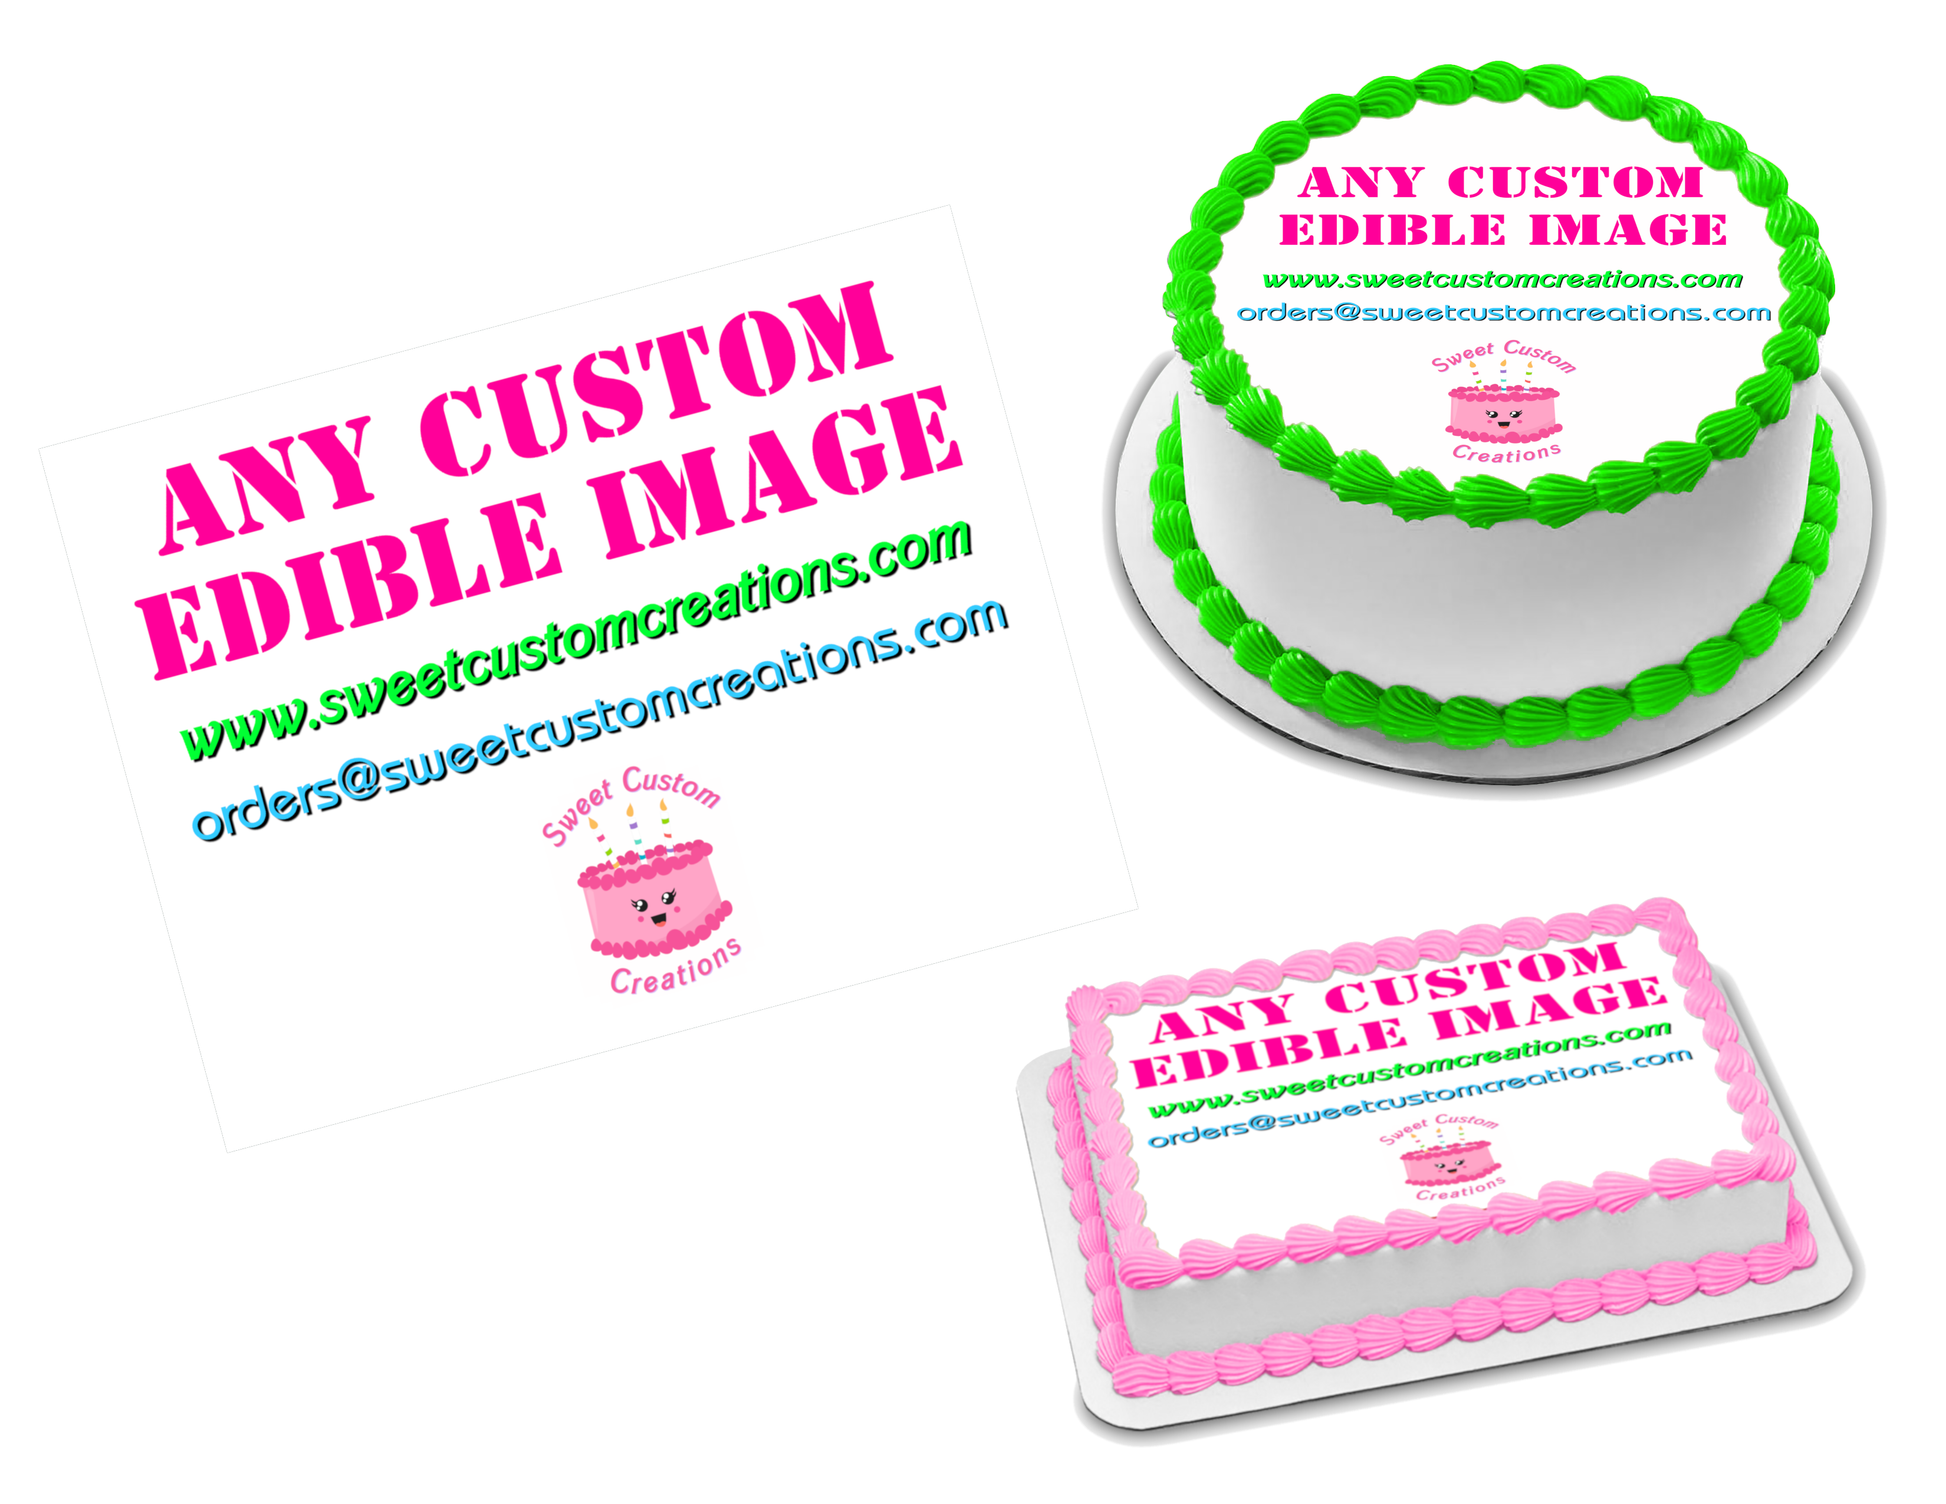 Louis Style Inspired Logo Cupcake Toppers **DIGITAL ORDER ONLY** Pink with  Brown Logo